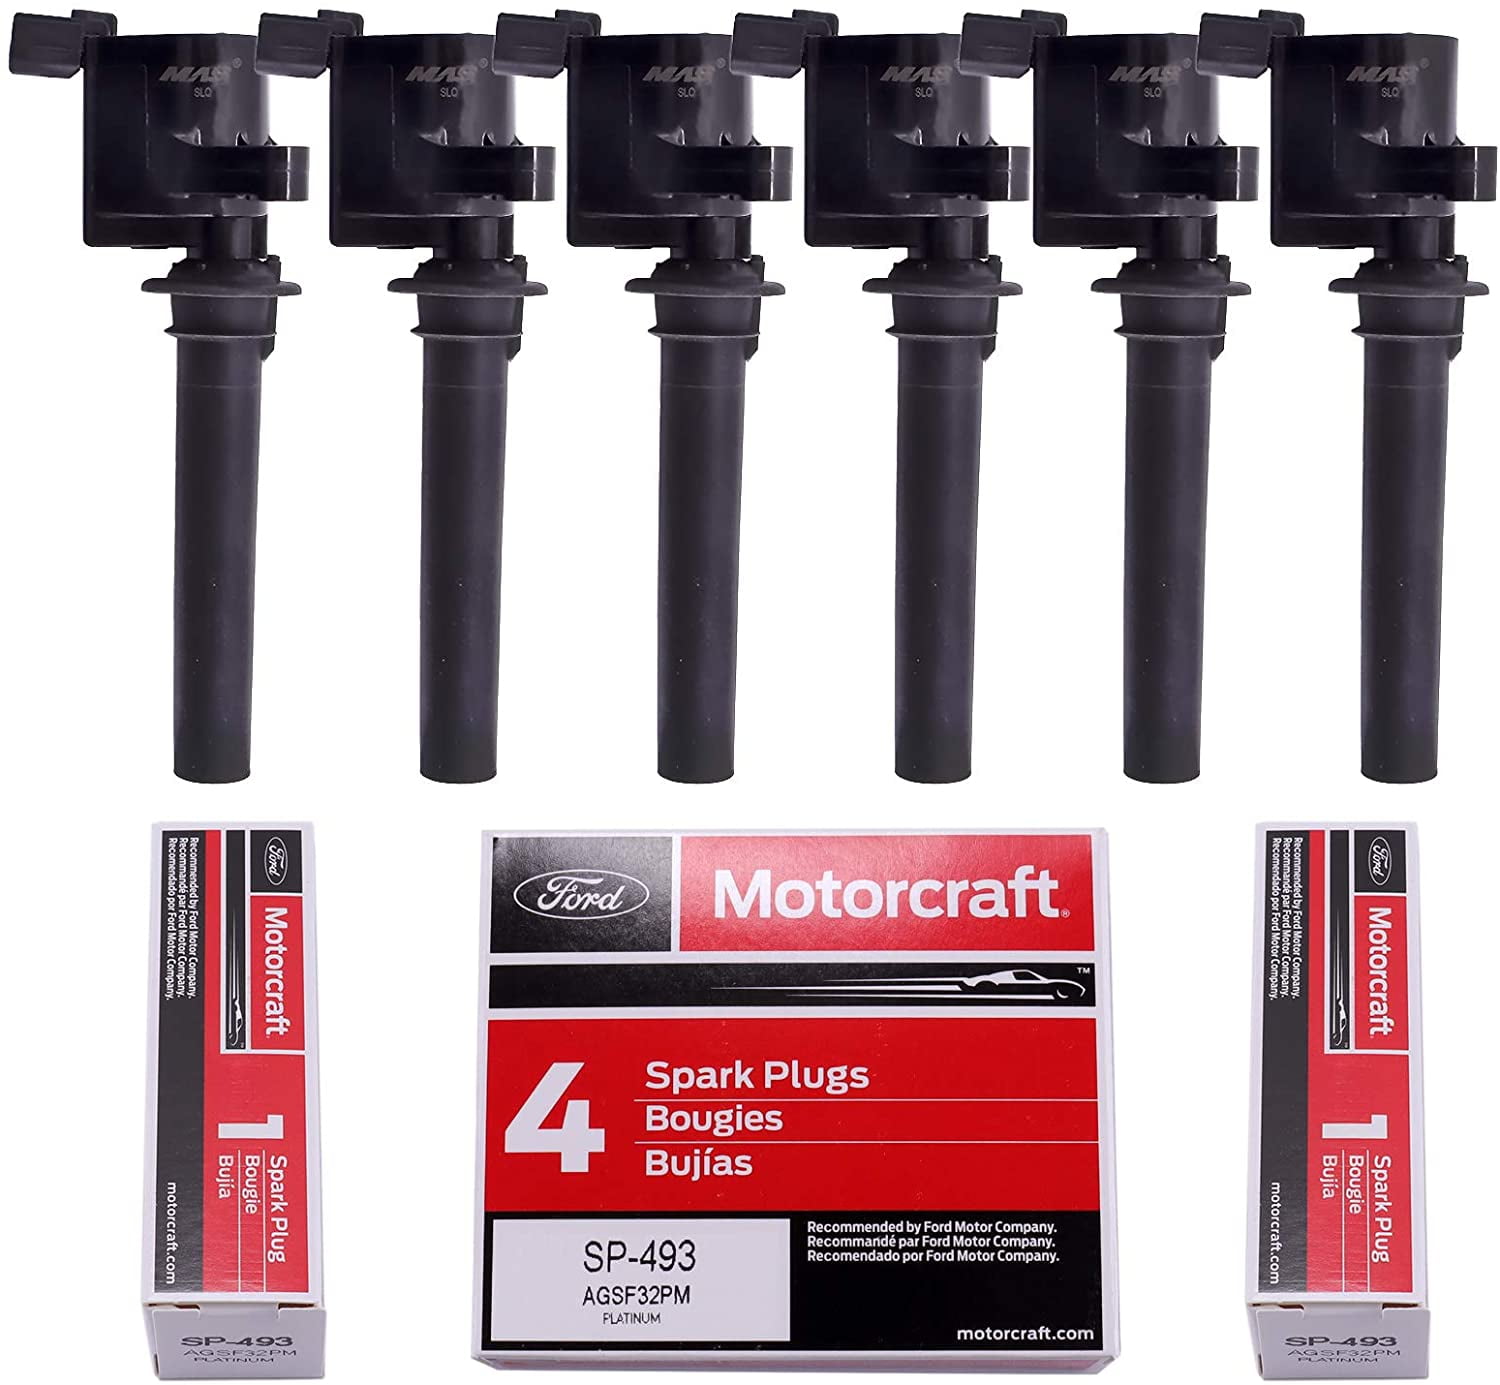 MAS Ignition Coils DG508 and Motorcraft Spark Plugs SP493 for Ford Lincoln Mercury 4.6L engines